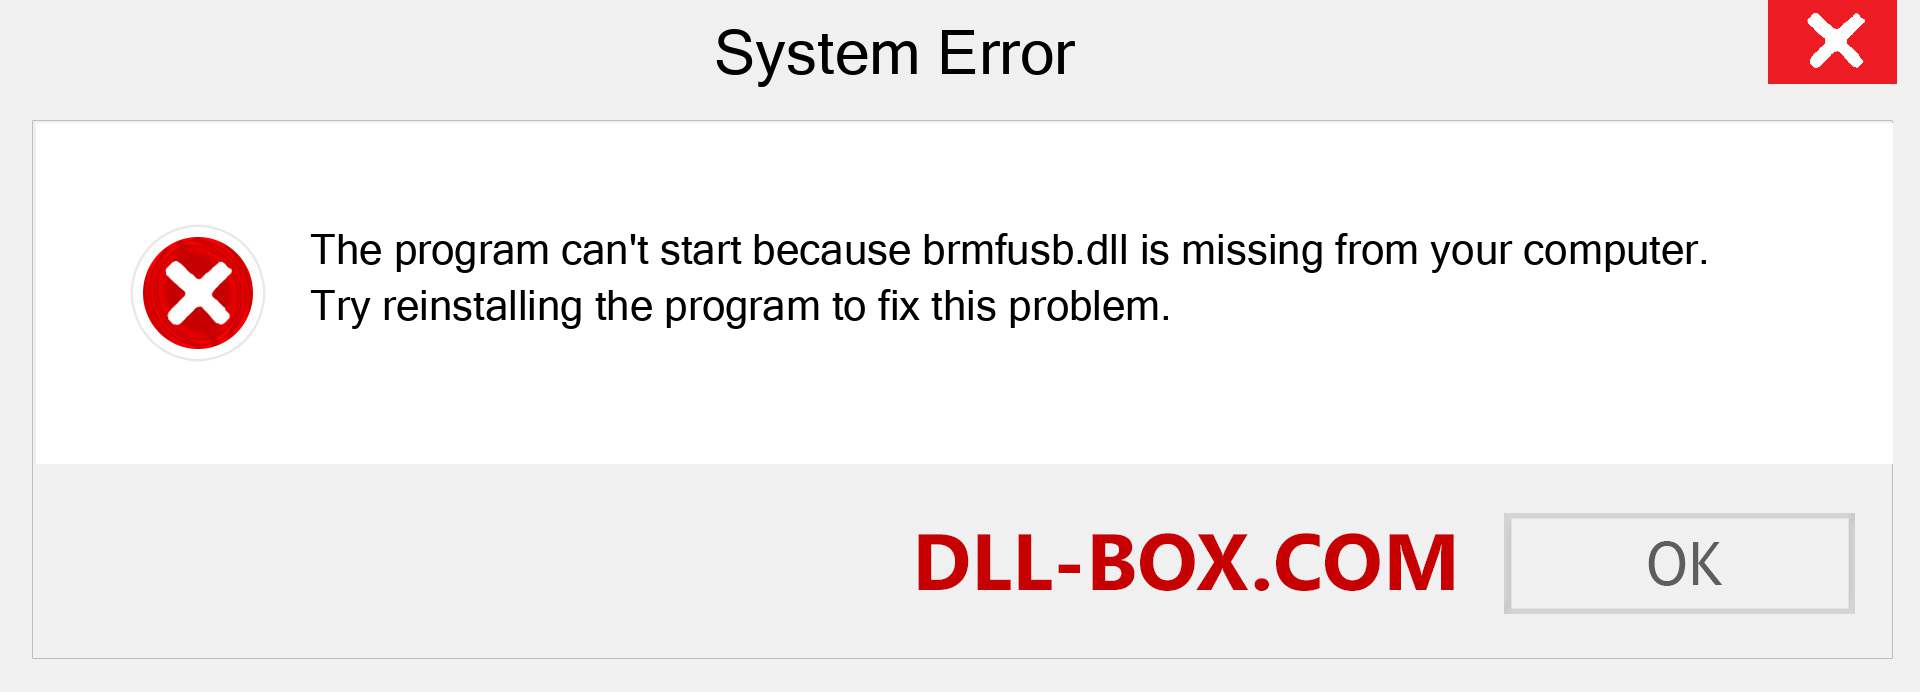  brmfusb.dll file is missing?. Download for Windows 7, 8, 10 - Fix  brmfusb dll Missing Error on Windows, photos, images